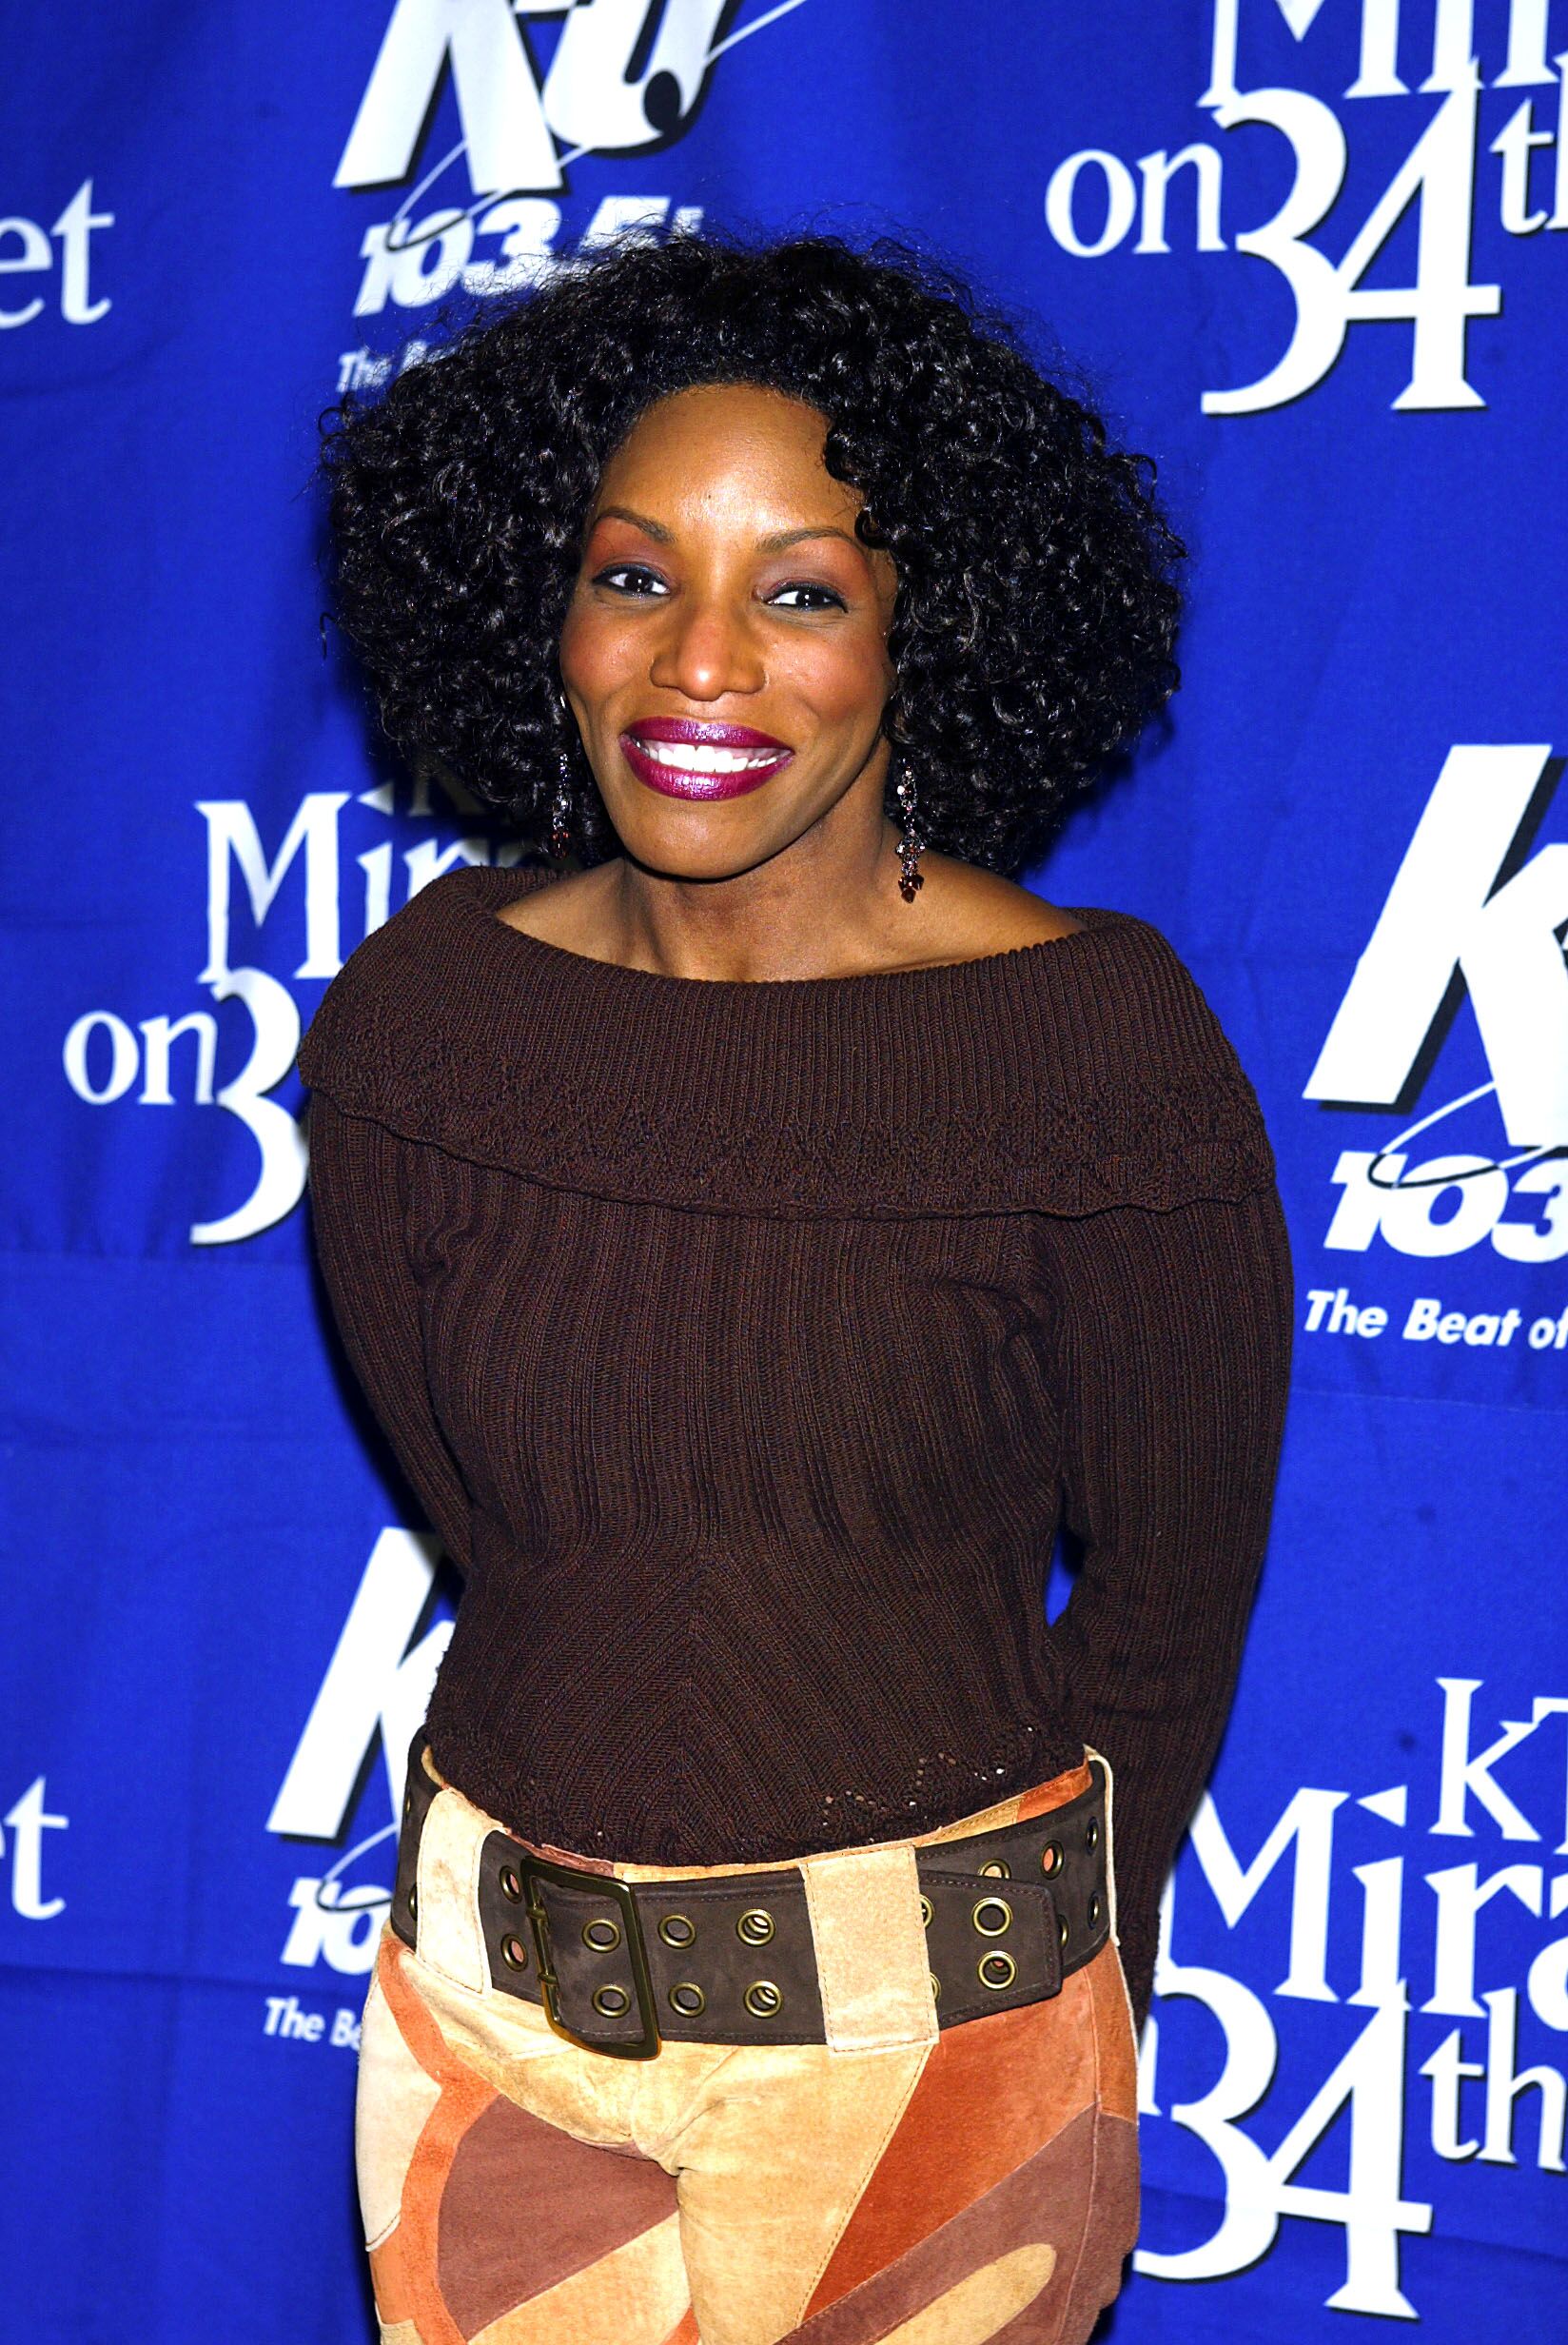 Stephanie Mills backstage during "KTU's Miracle on 34th Street" hoilday concert at Madison Square Garden in New York City. December 18, 2002. | Source: Getty Images